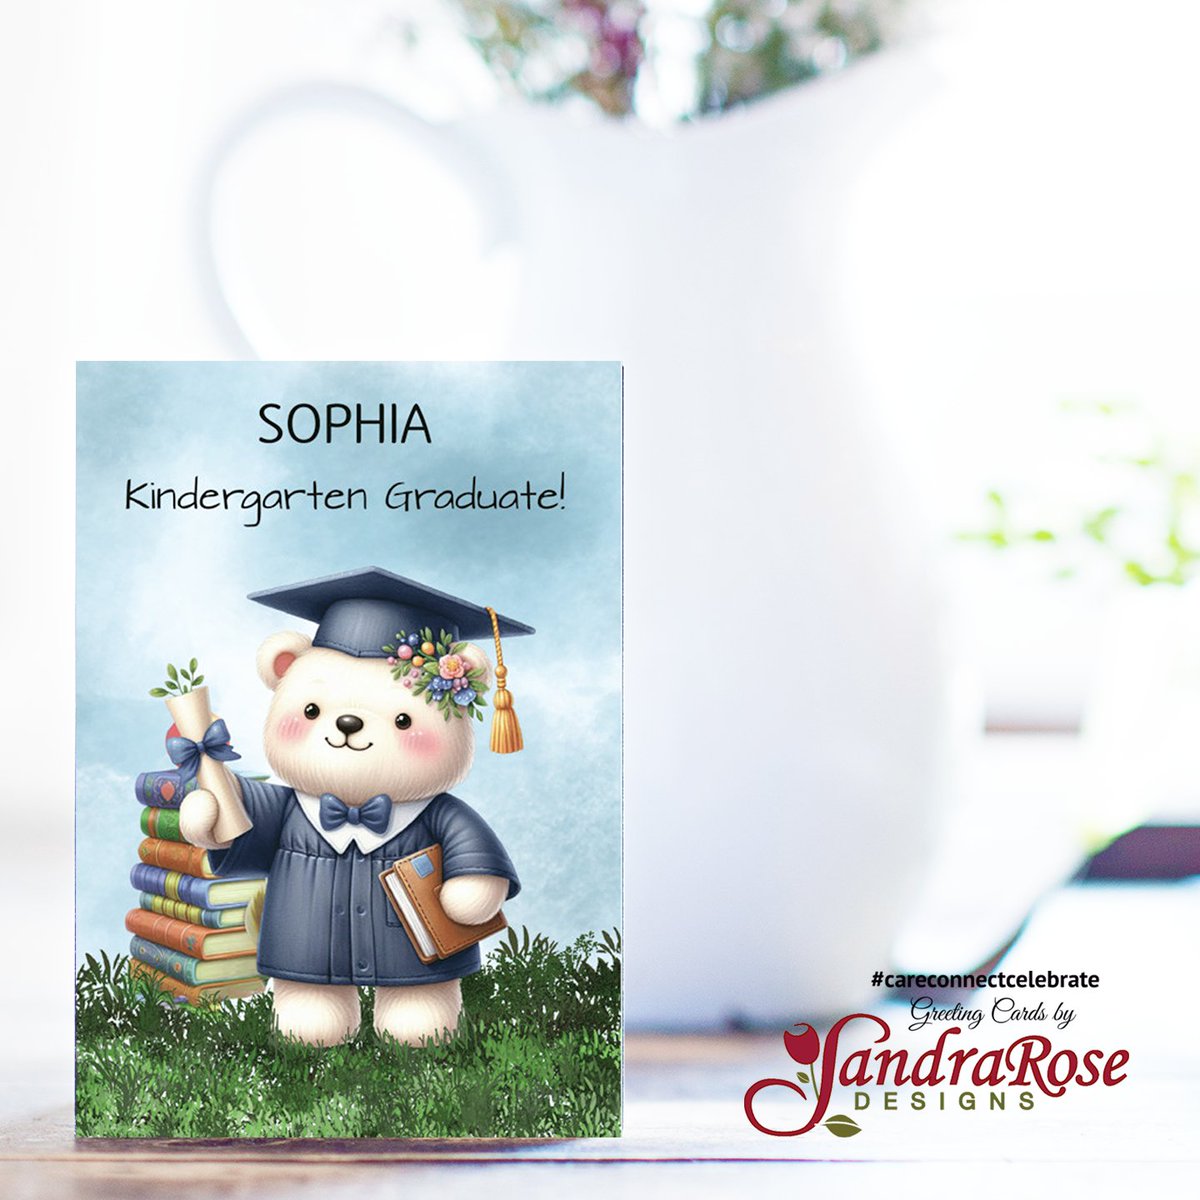 The card is a personalized and heartwarming greeting card, designed to celebrate a young girl's significant milestone in her educational journey. #CareConnectCelebrate #SandraRoseDesigns @GCUniverse #Greetingcards #Greetingcard #graduation greetingcarduniverse.com/congratulation…